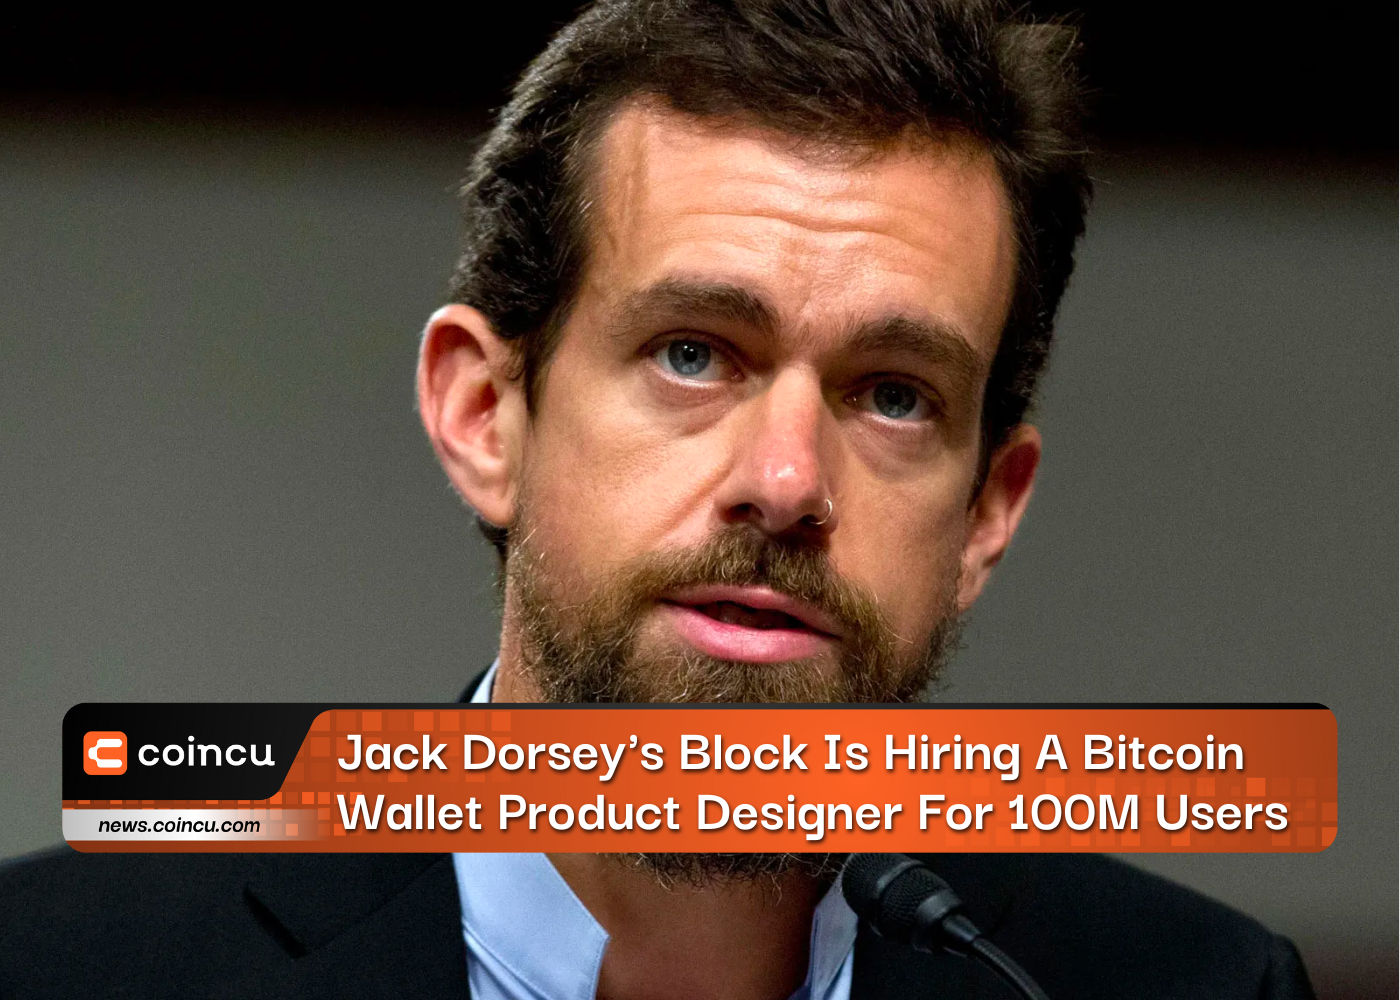 Jack Dorsey's Block Is Hiring A Bitcoin Wallet Product Designer For 100M Users